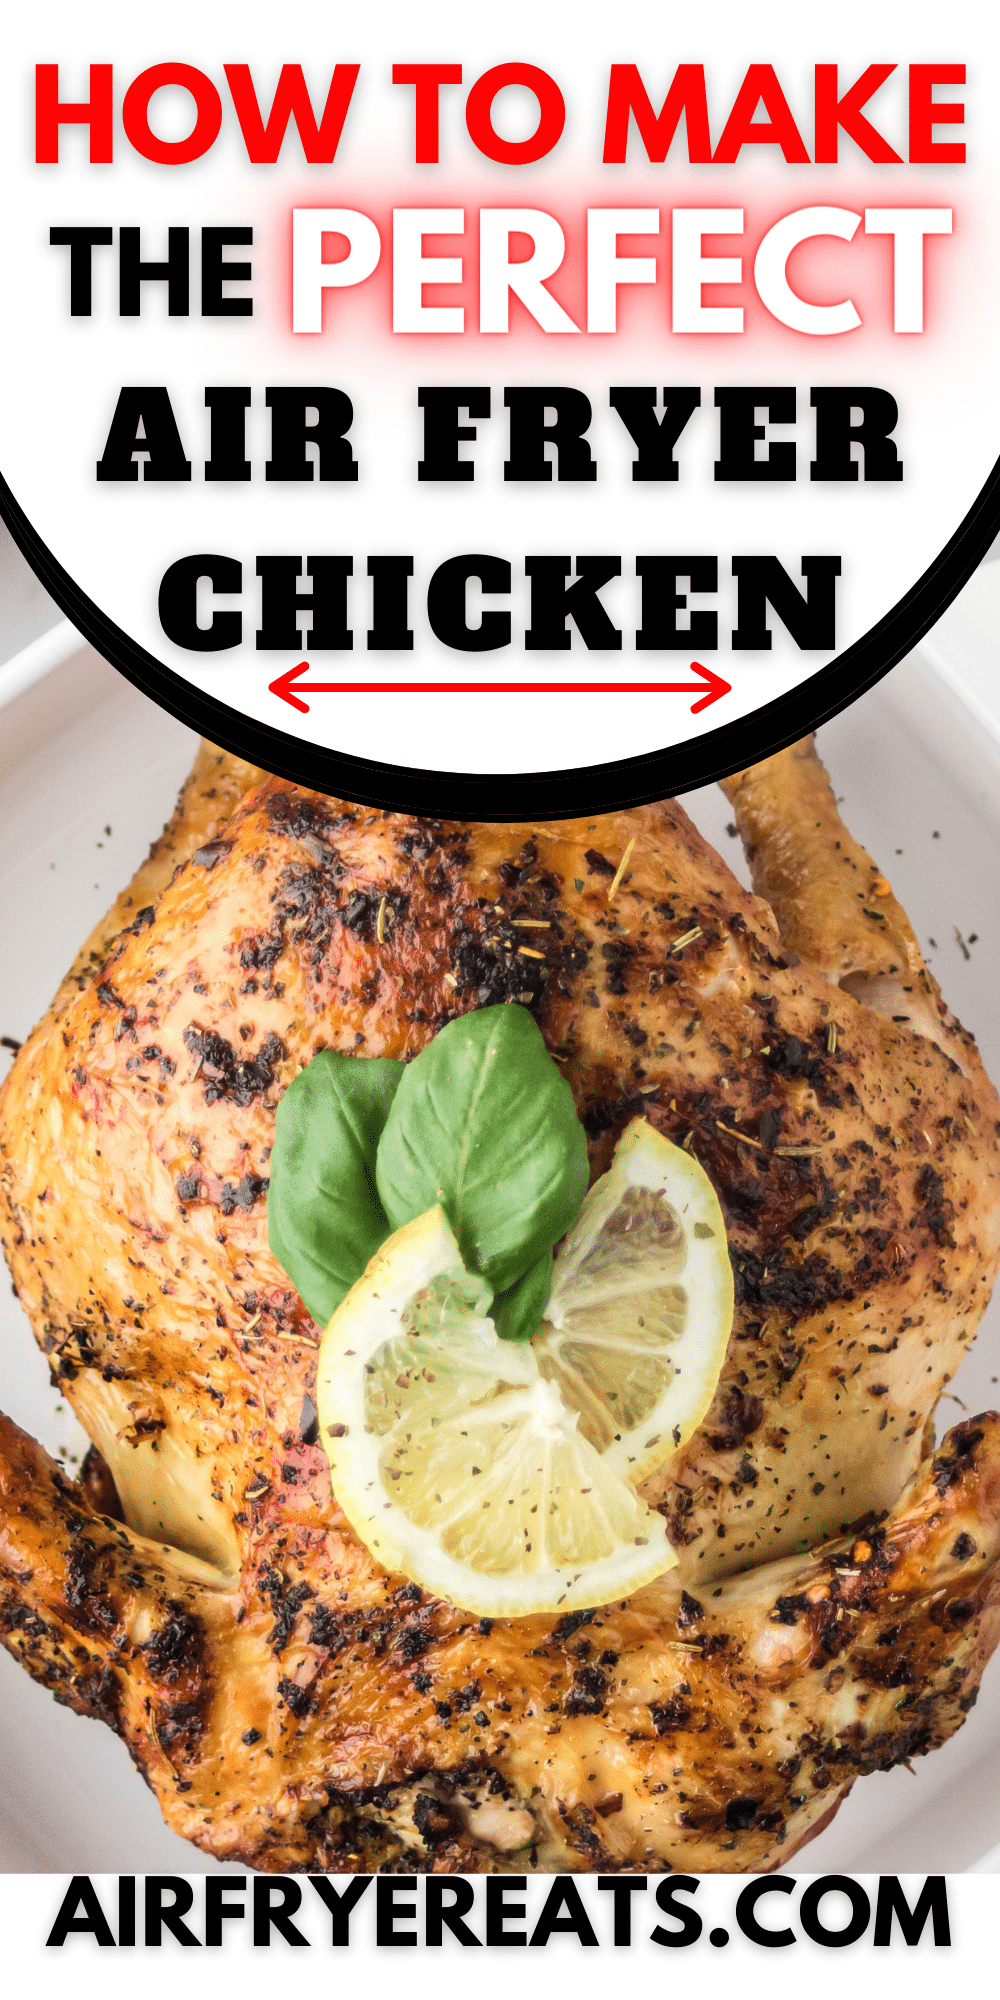 Ninja Foodi Whole Chicken is a super easy method for making a delicious rotisserie-style chicken at home. A delicious spice rub makes this the best air fryer chicken ever! via @vegetarianmamma